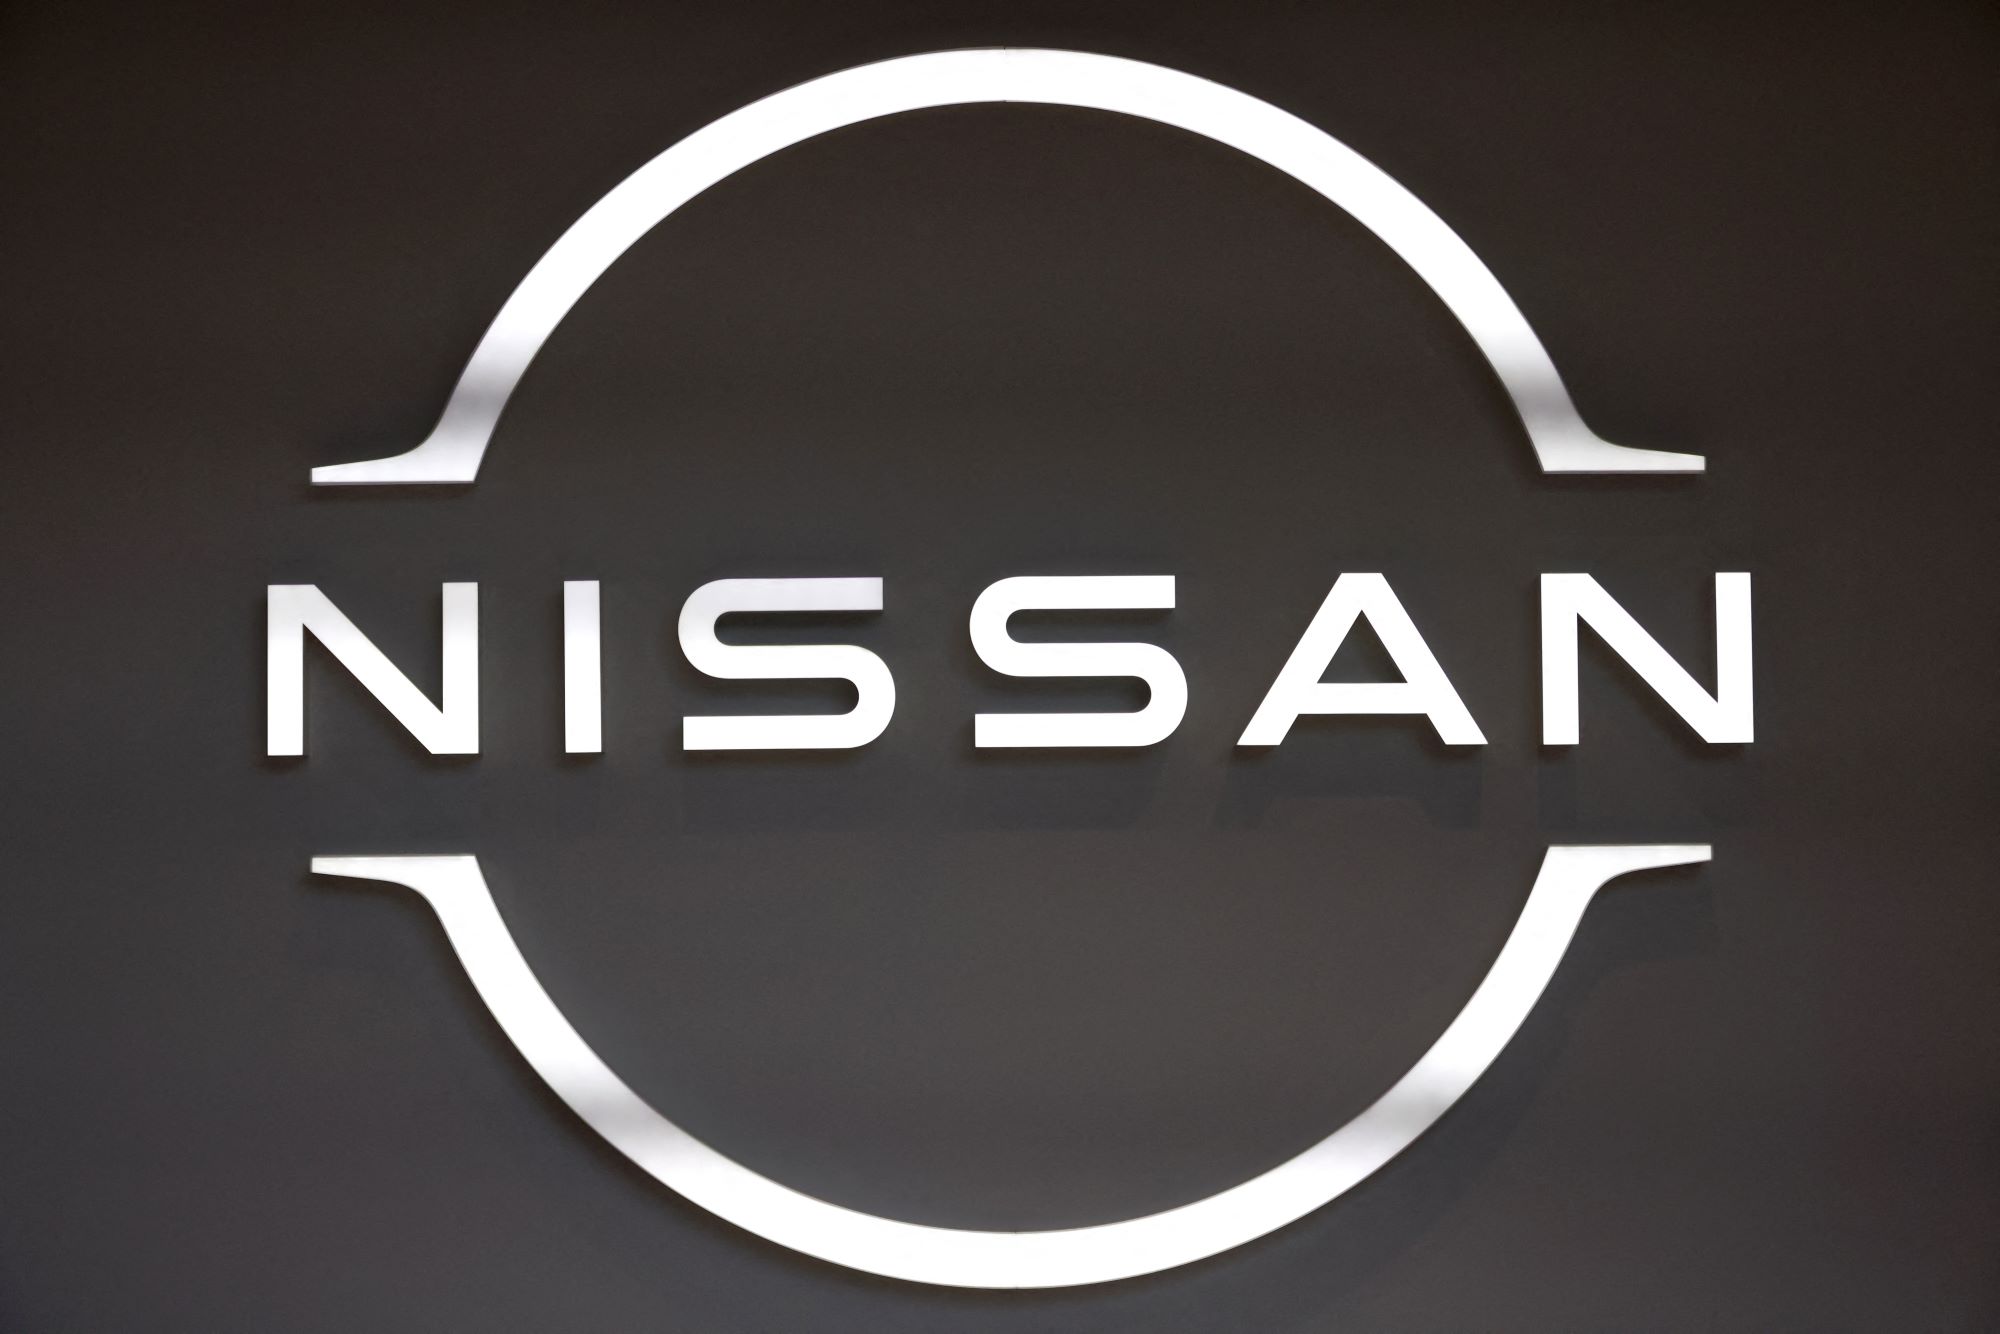 A white Nissan logo, maker of the Nissan Z series, on a black background.